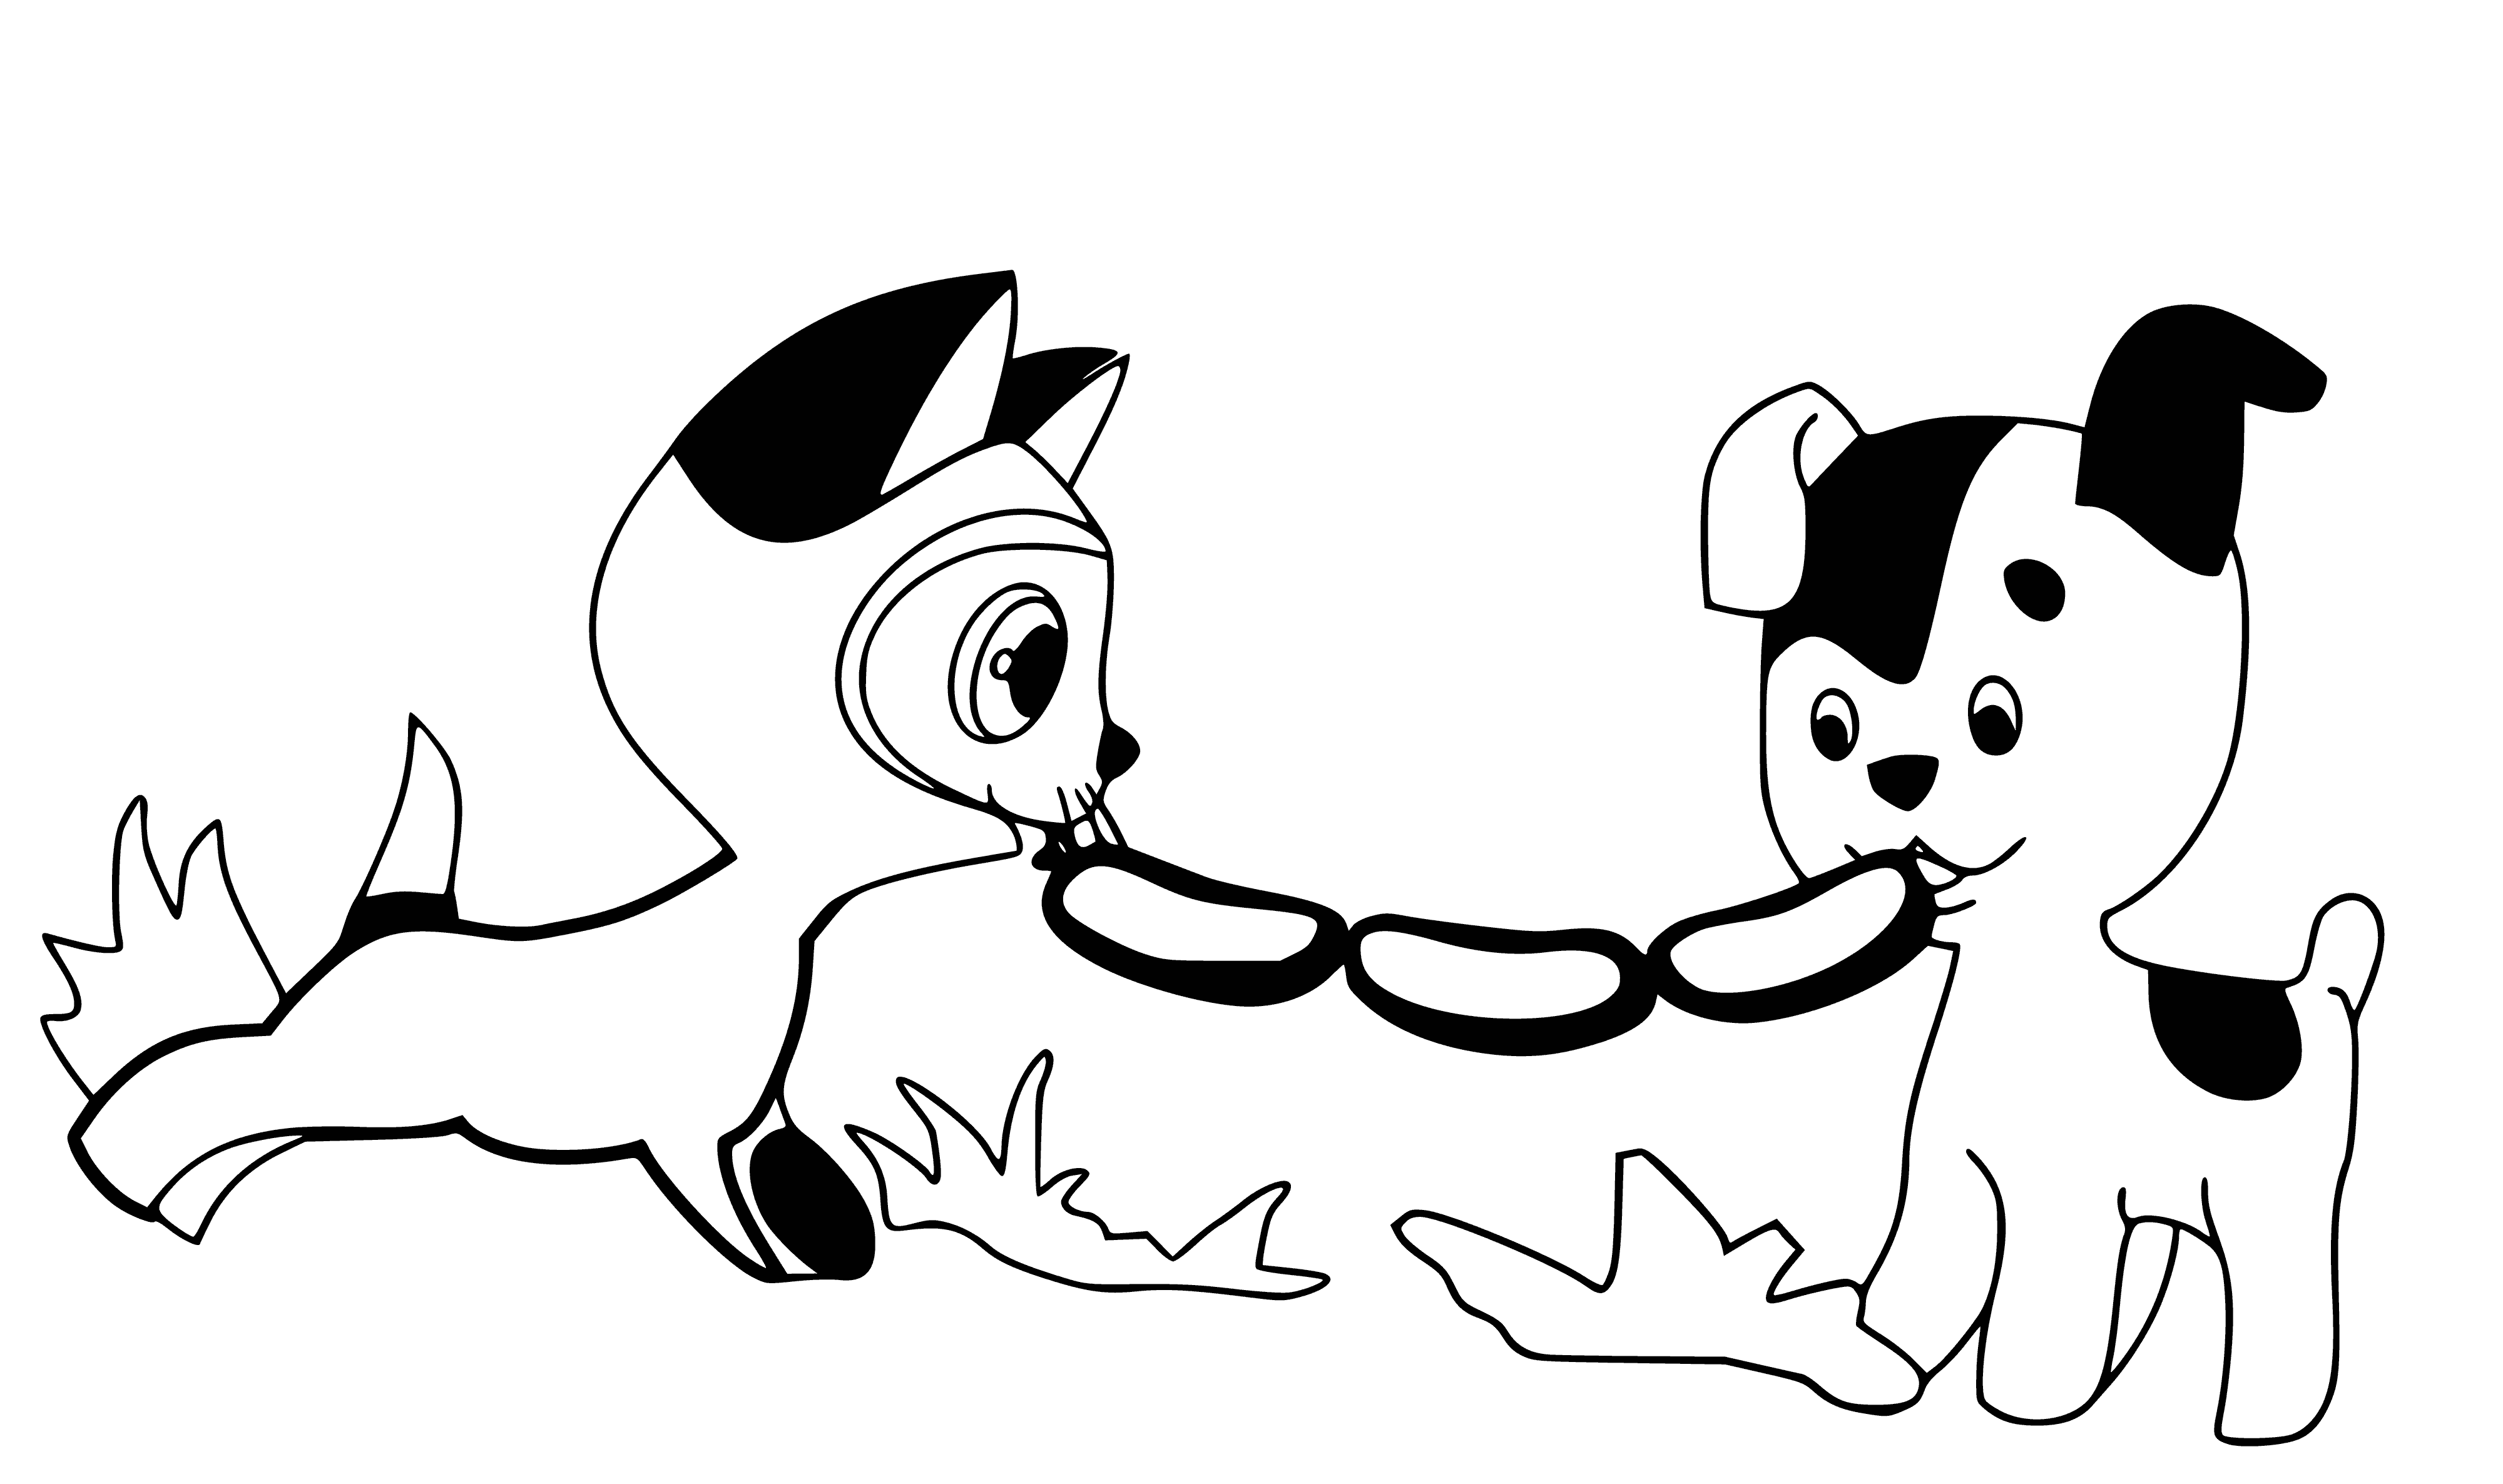 coloring page: Two cute animals, a kitten and puppy, sitting and standing together looking at the camera. #adorable